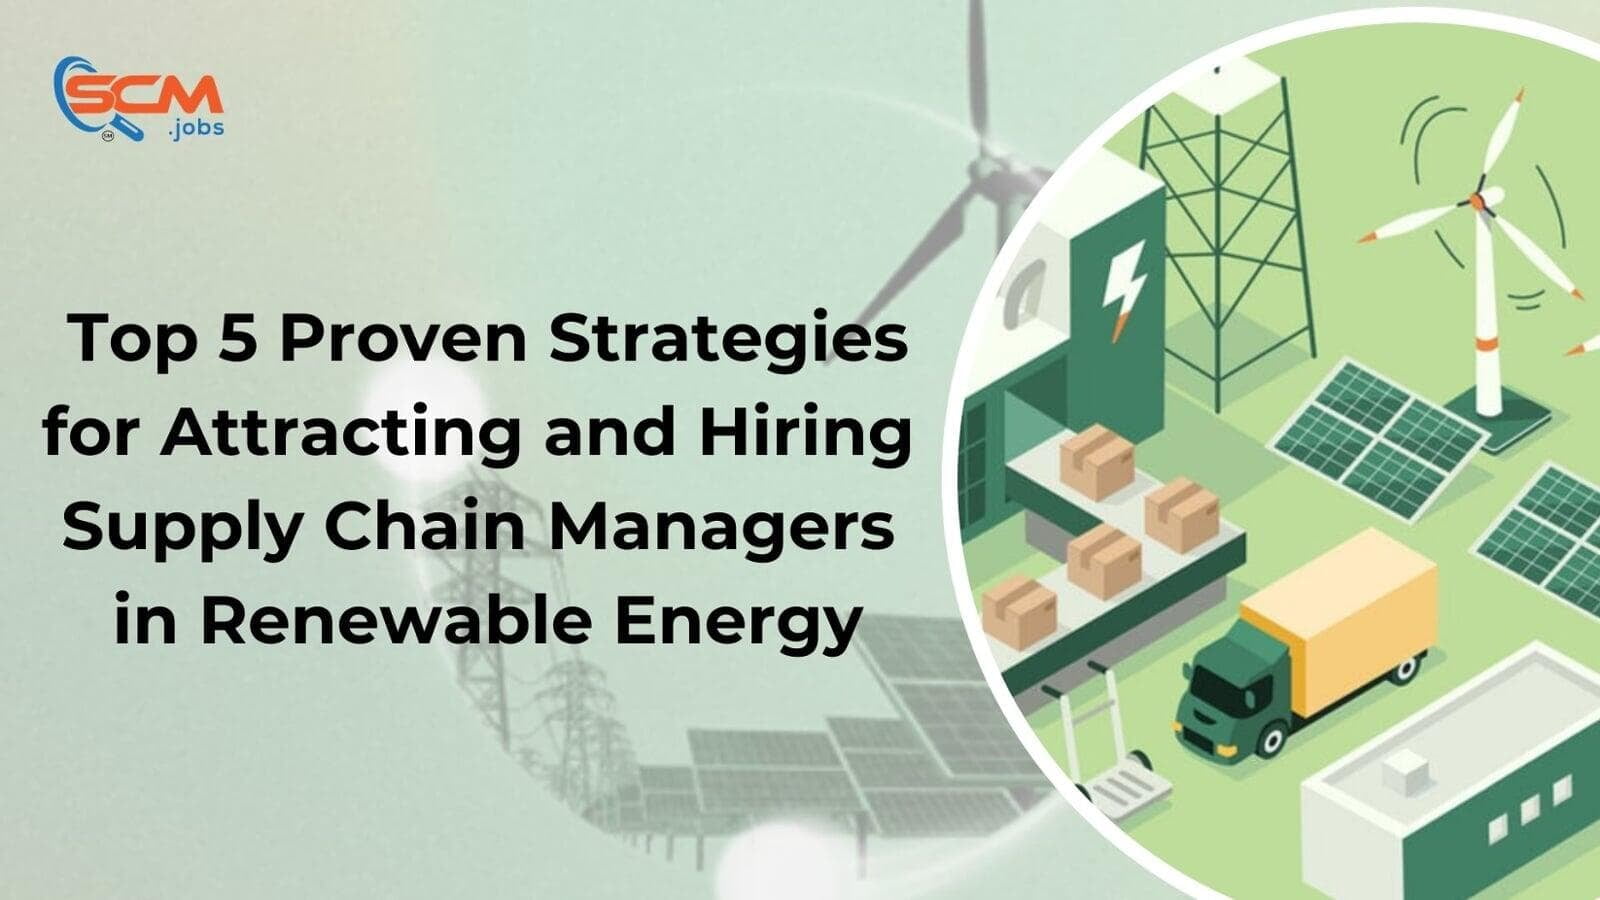 Top 5 Proven Strategies for Attracting and Hiring Supply Chain Managers in Renewable Energy